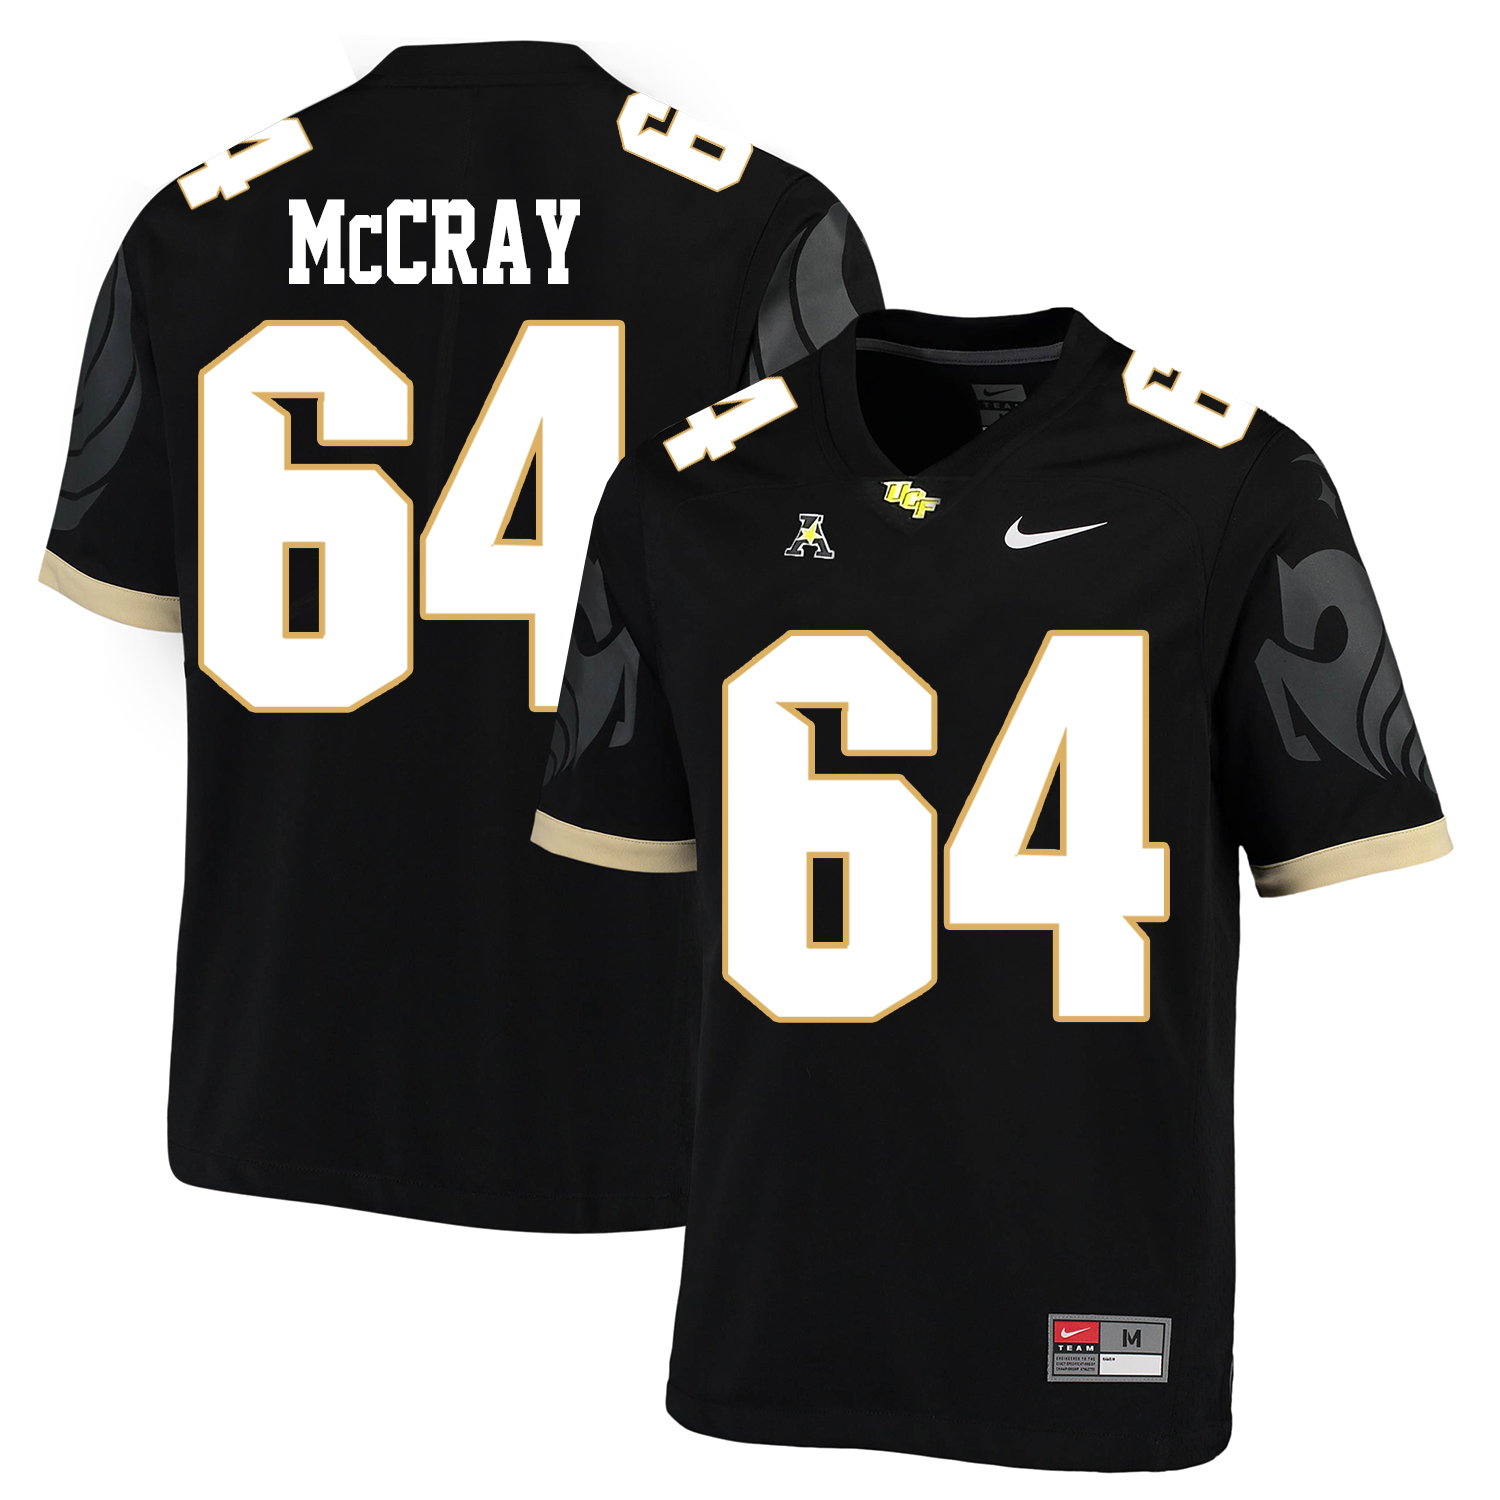 UCF Knights 64 Justin McCray Black College Football Jersey